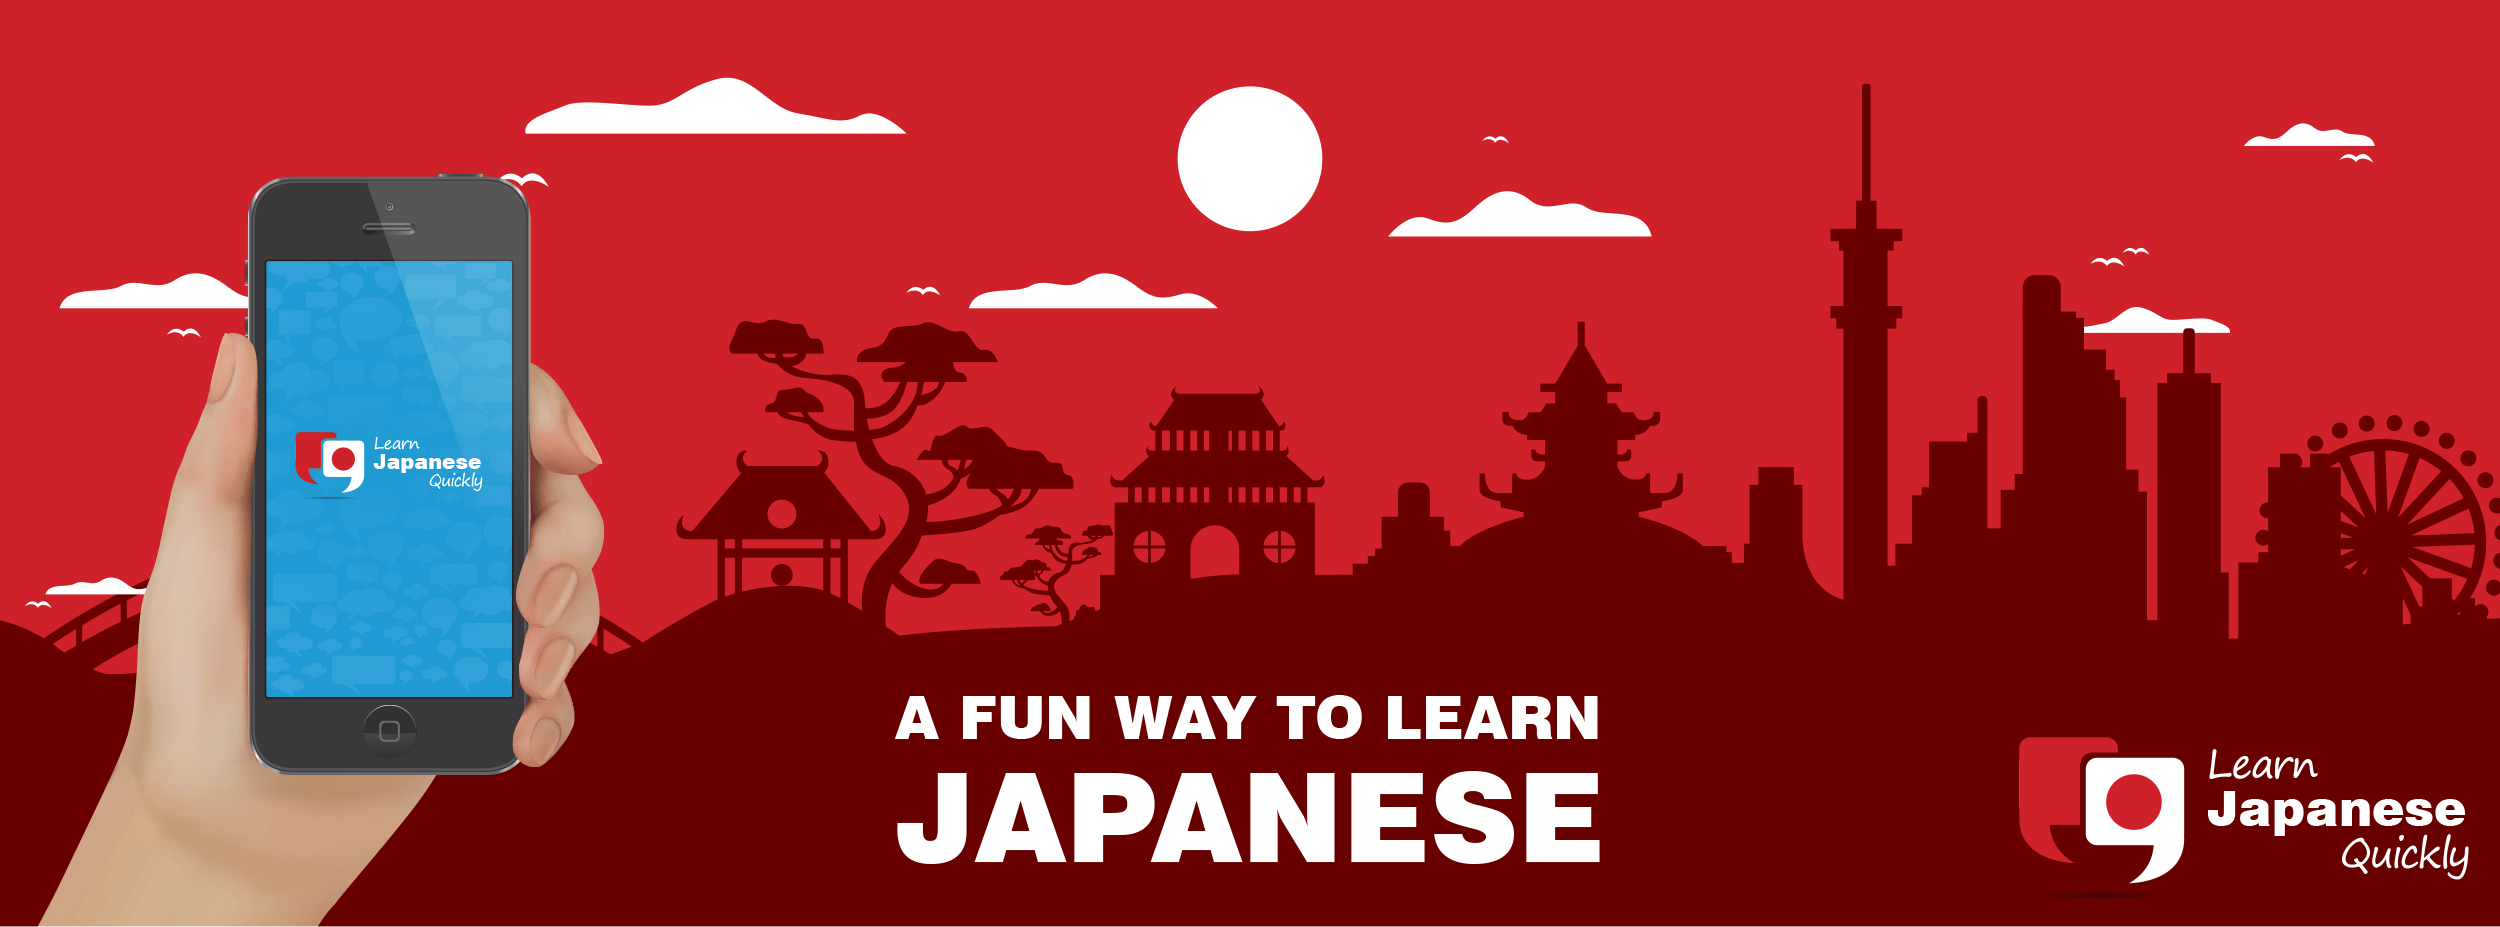 Learn Japanese Quickly